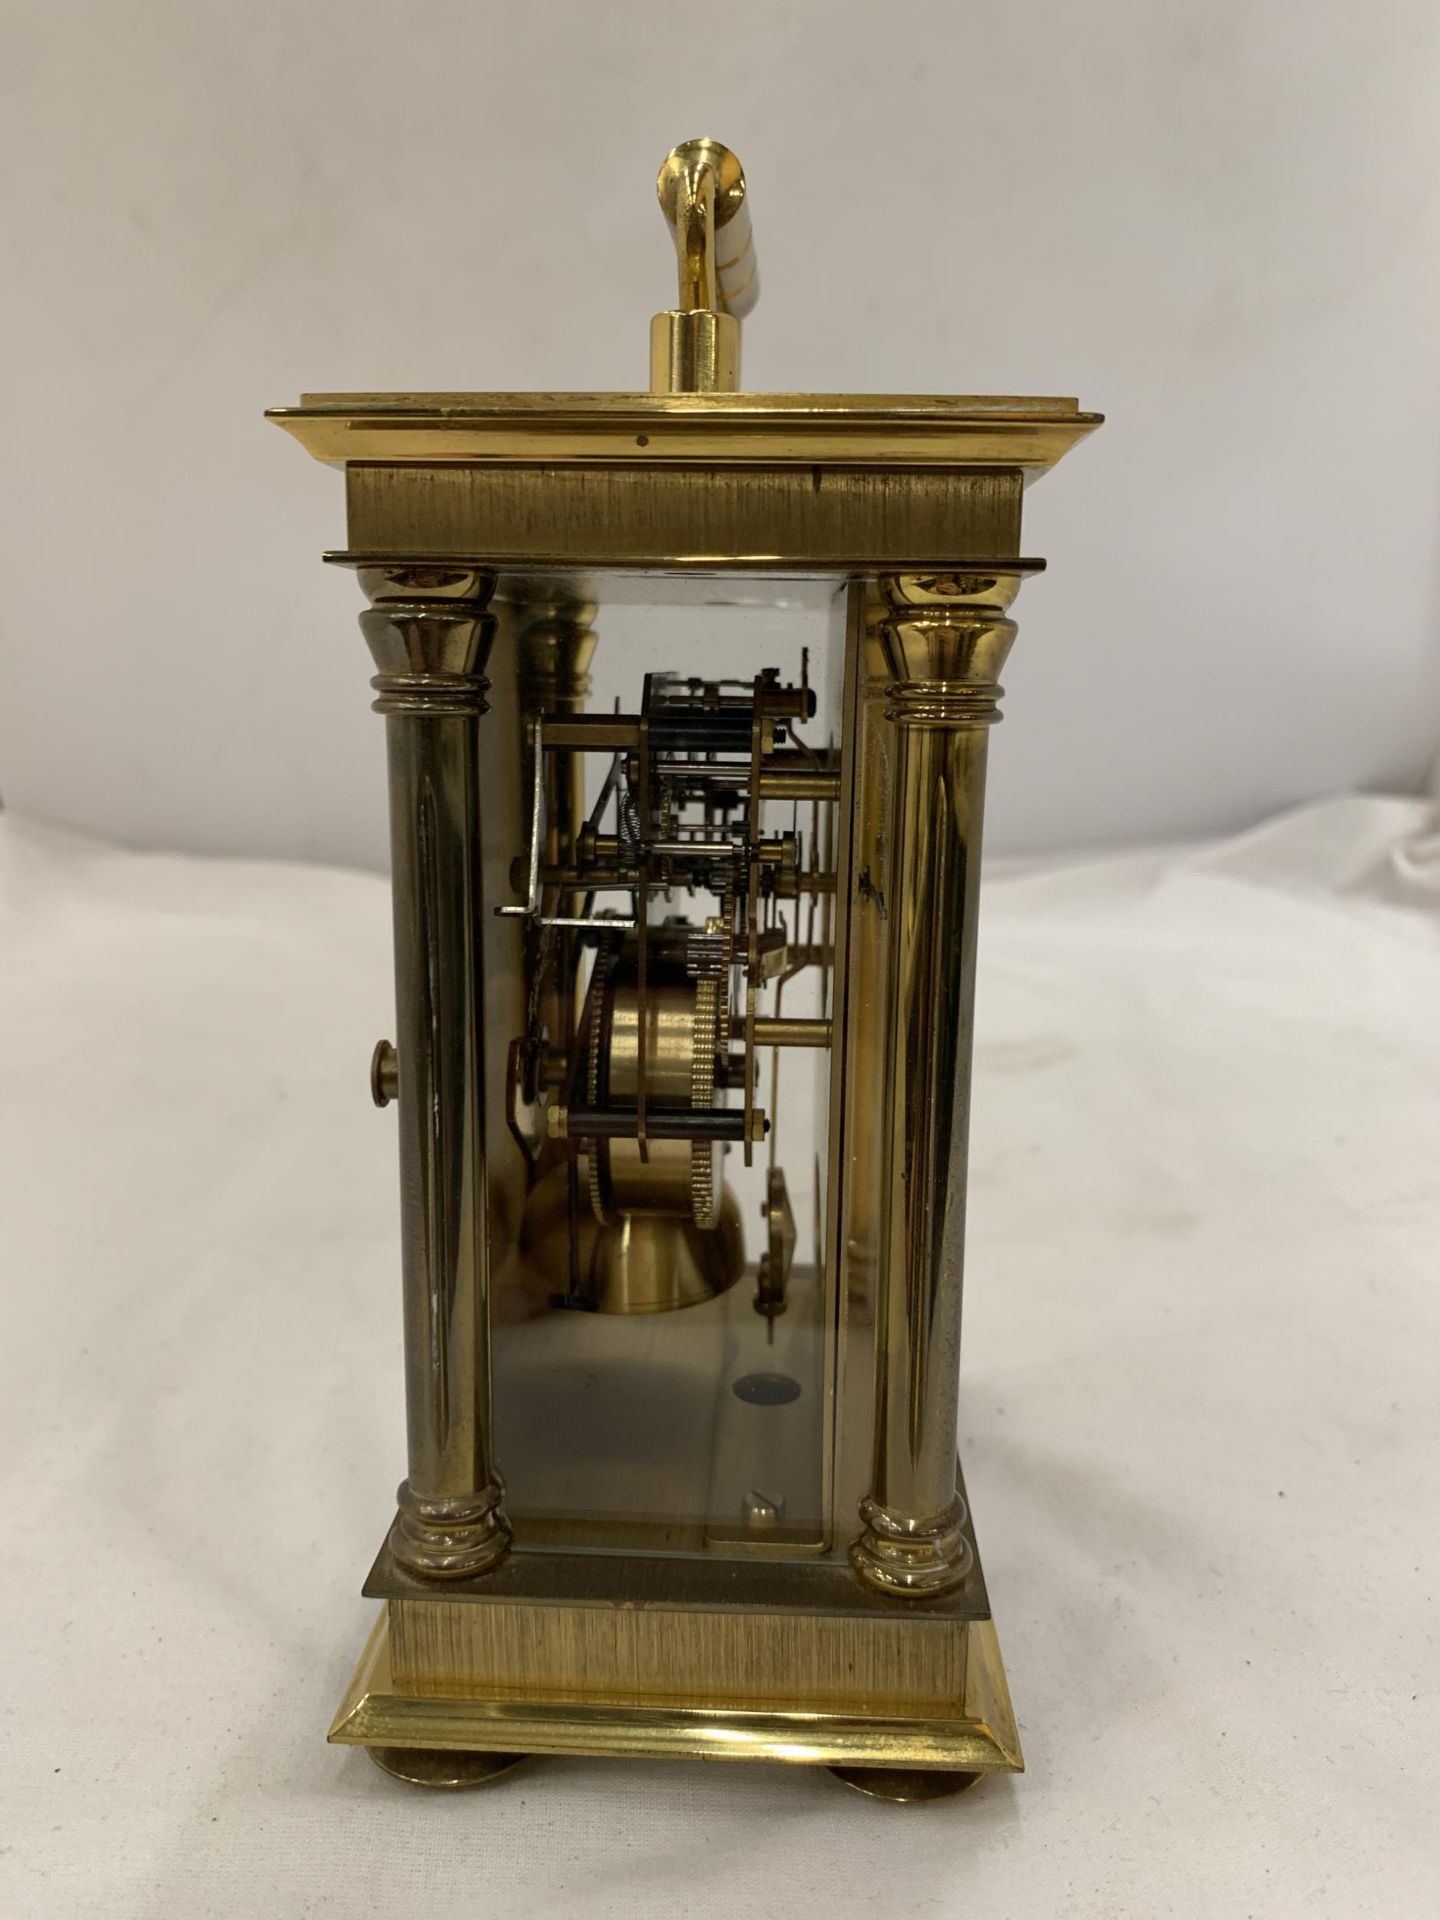 AN 'ANSTEY WILSON' MECHANICAL CARRIAGE CLOCK, WITH PRESENTATION PLAQUE TO THE BACK - Image 4 of 8